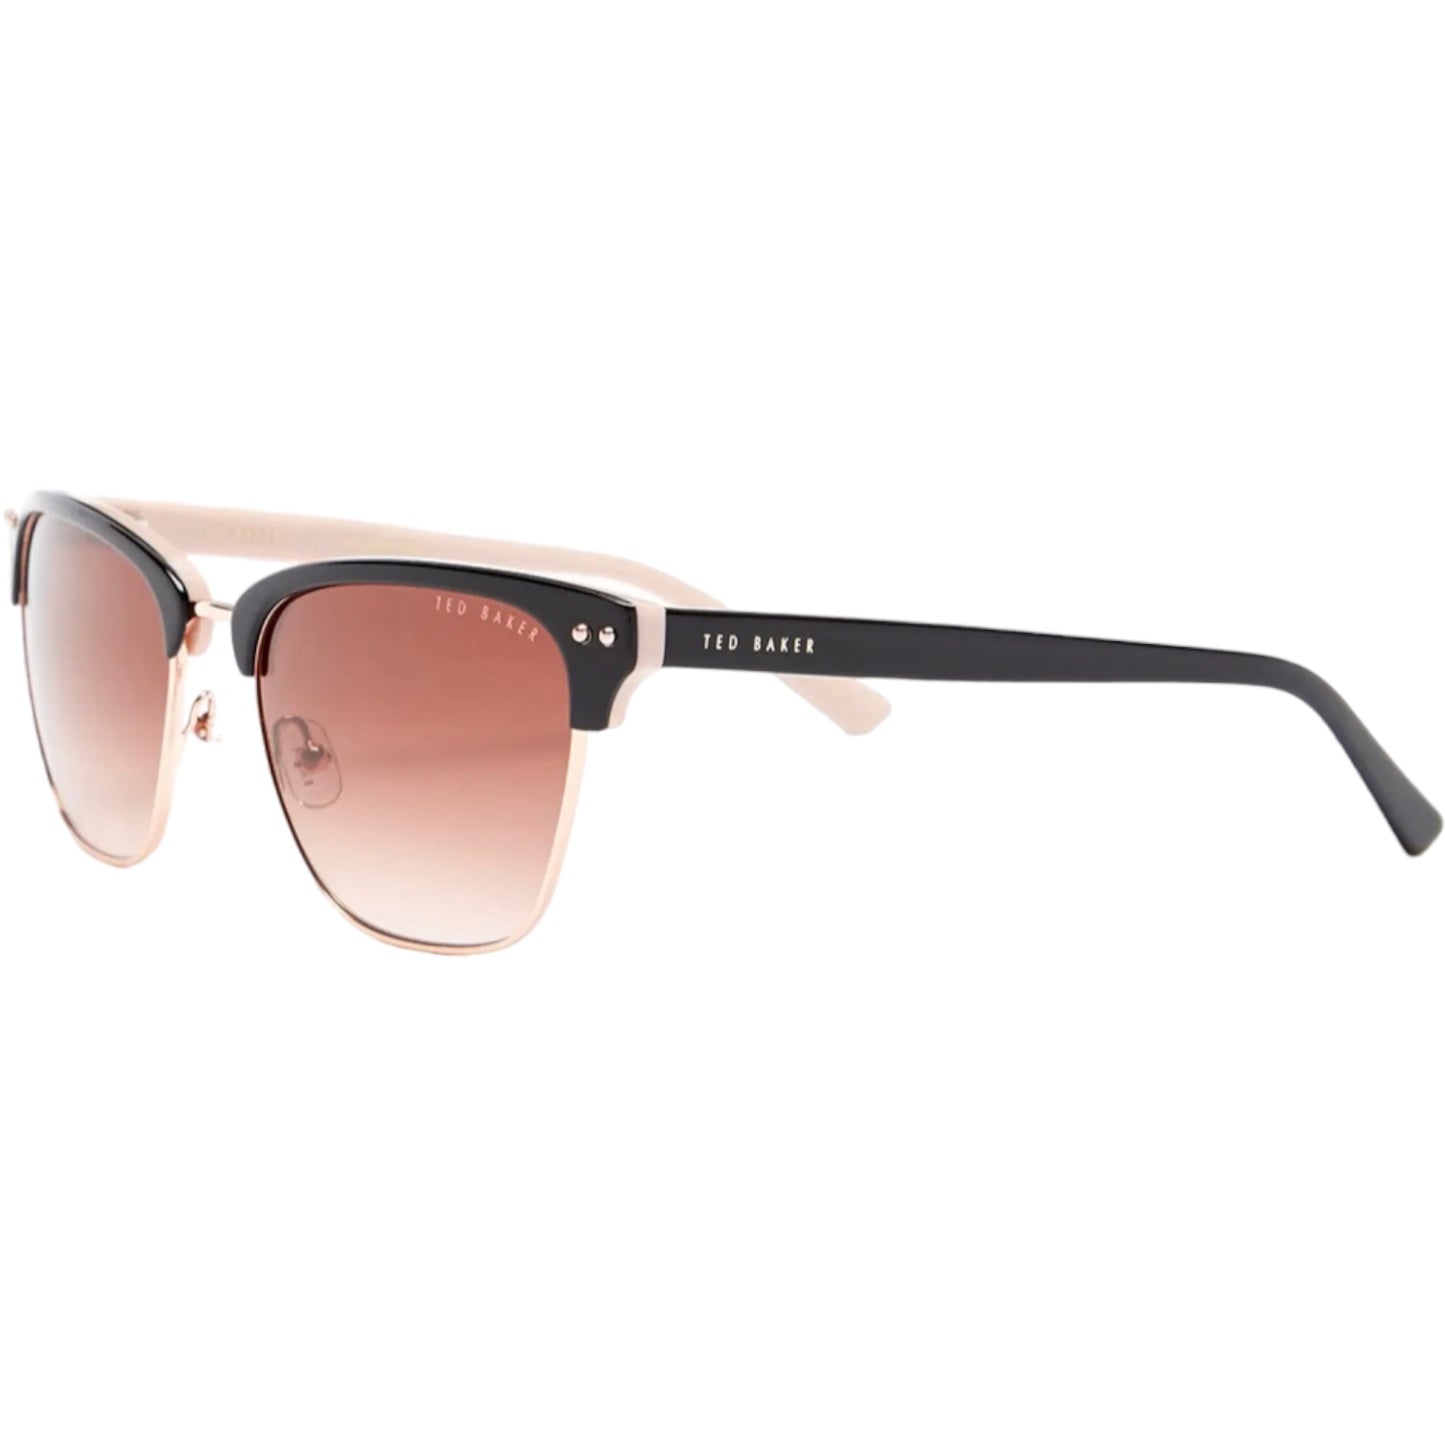 Ted Baker 52mm Clubmaster Sunglasses